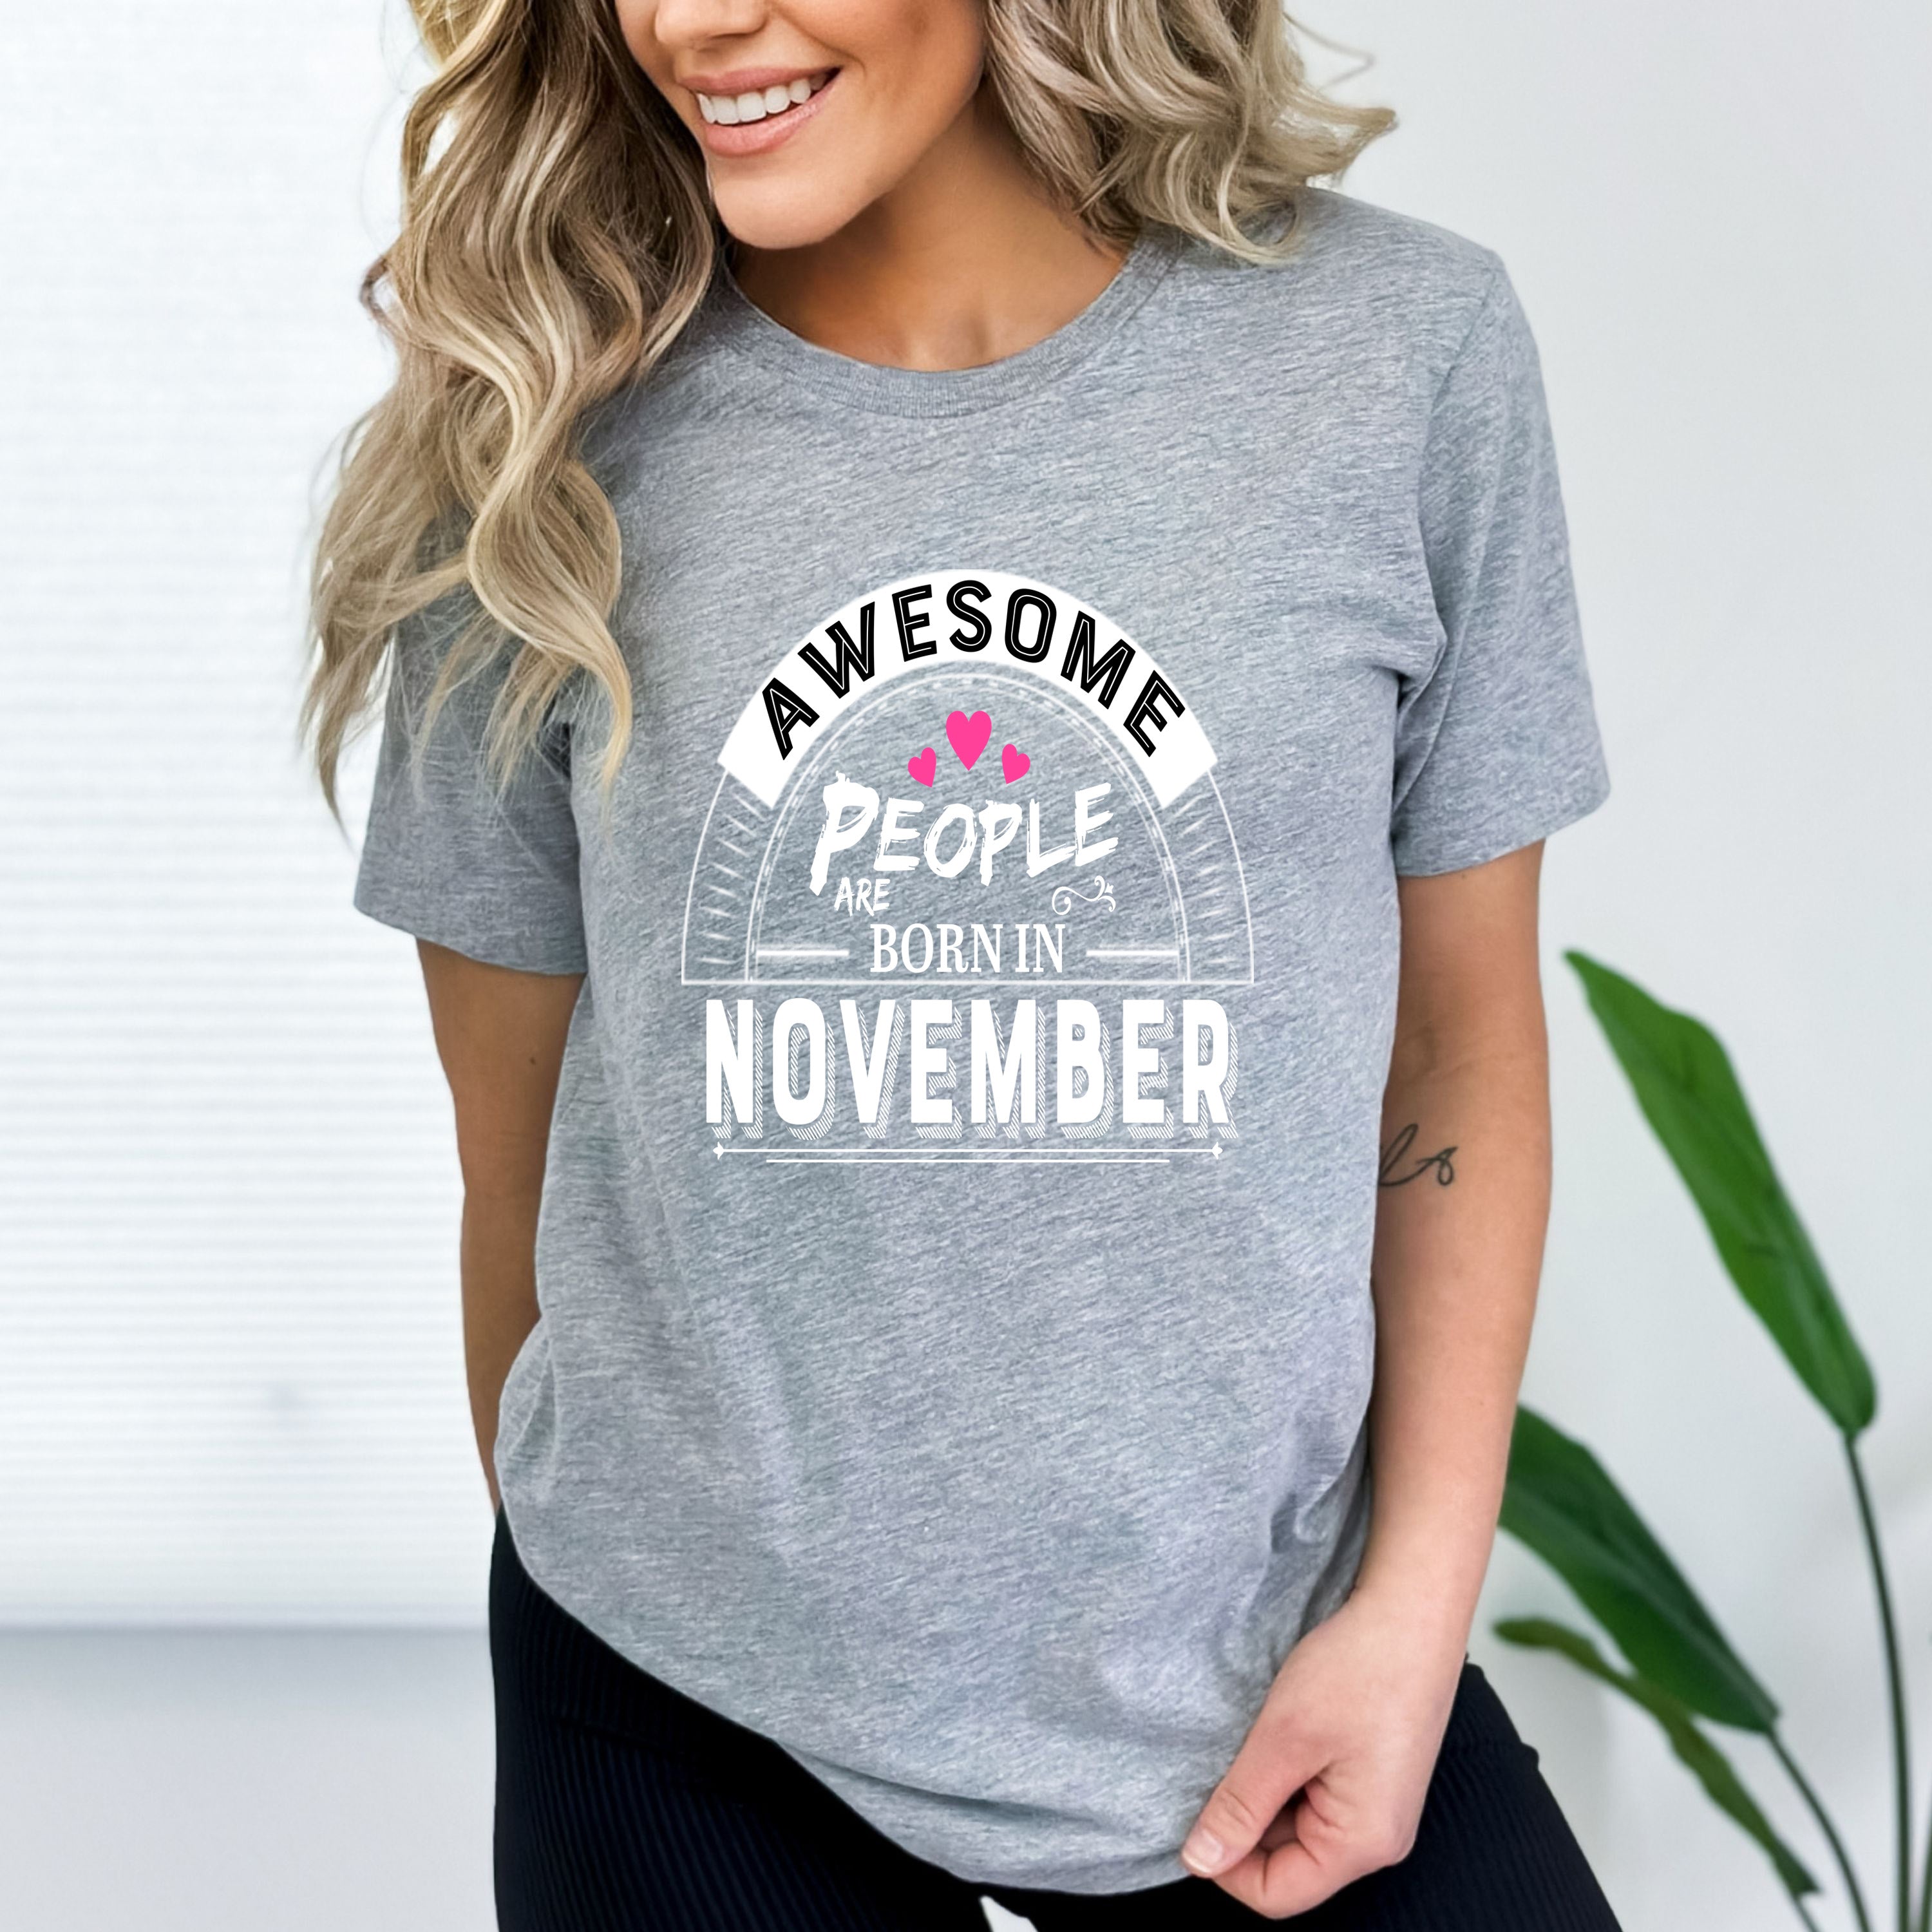 "Awesome People Are Born In November"